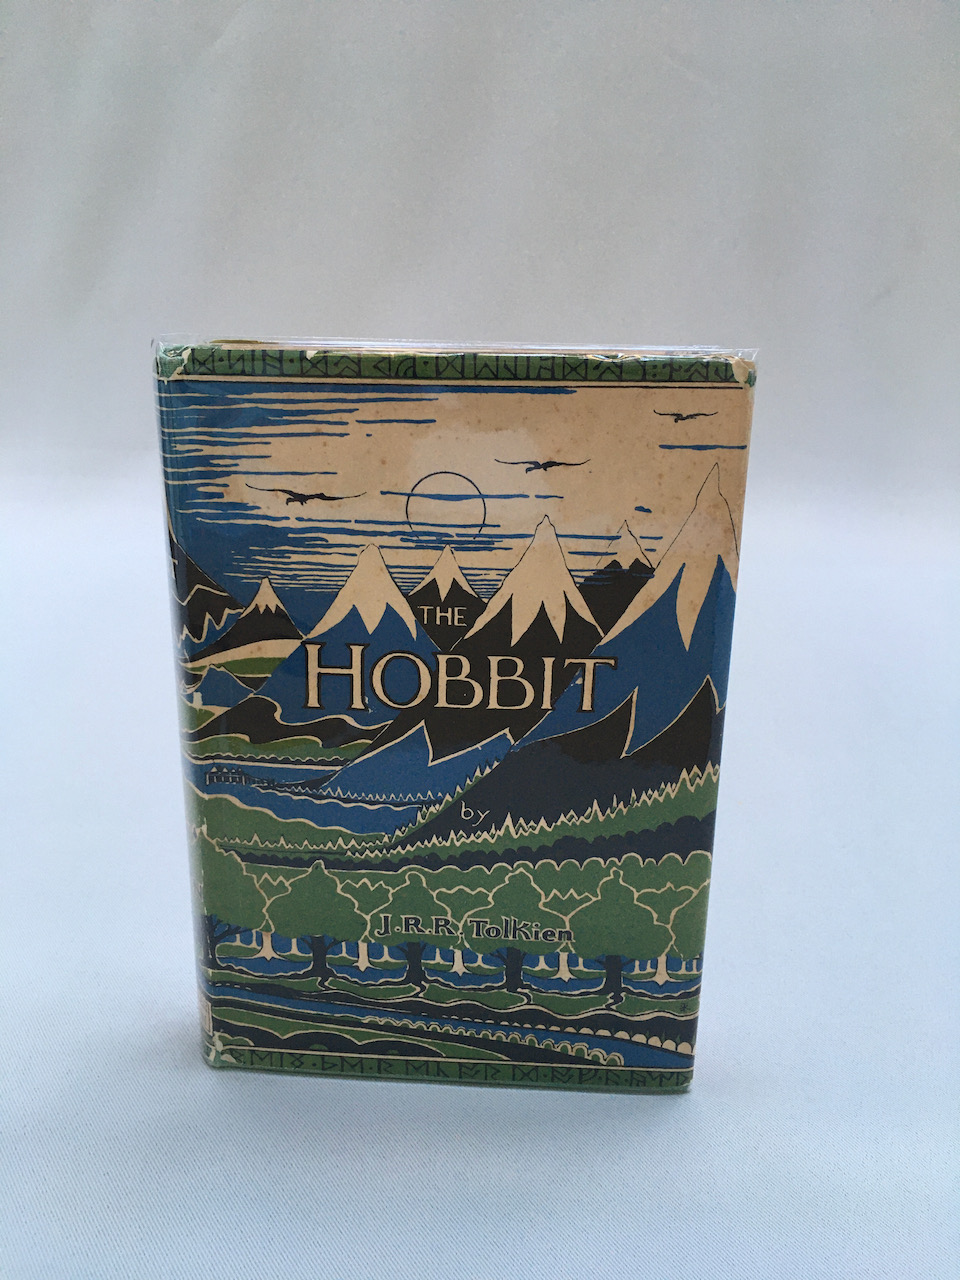 The Hobbit, or There and Back Again, by J.R.R. Tolkien. Published by Allen & Unwin in 1951